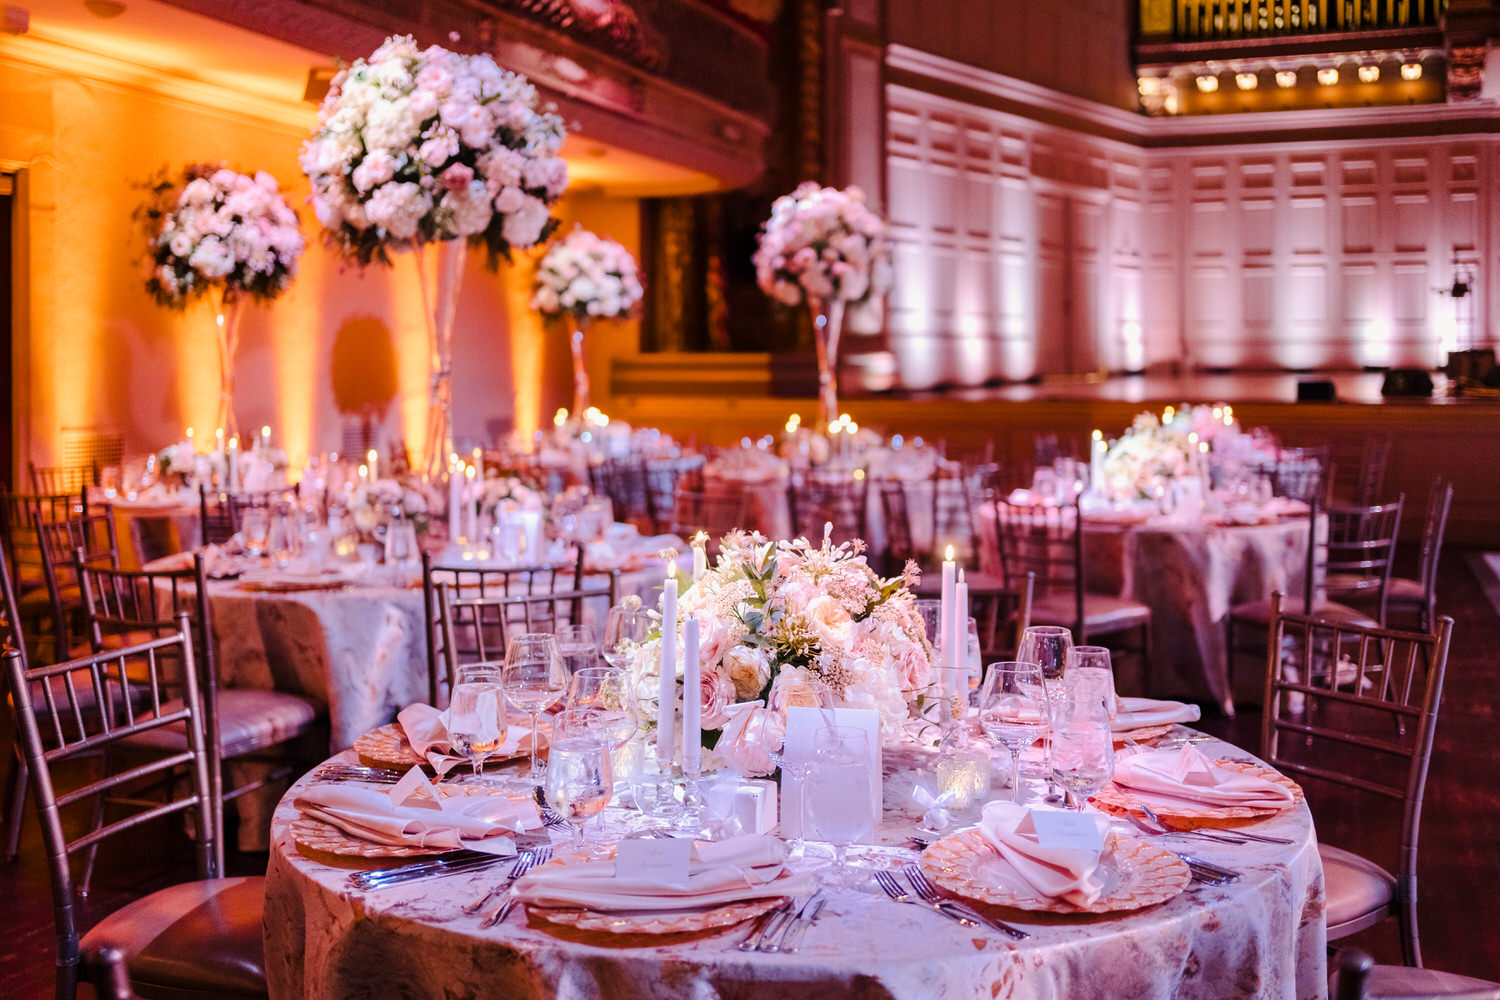 A wedding reception set up in a large ballroom.